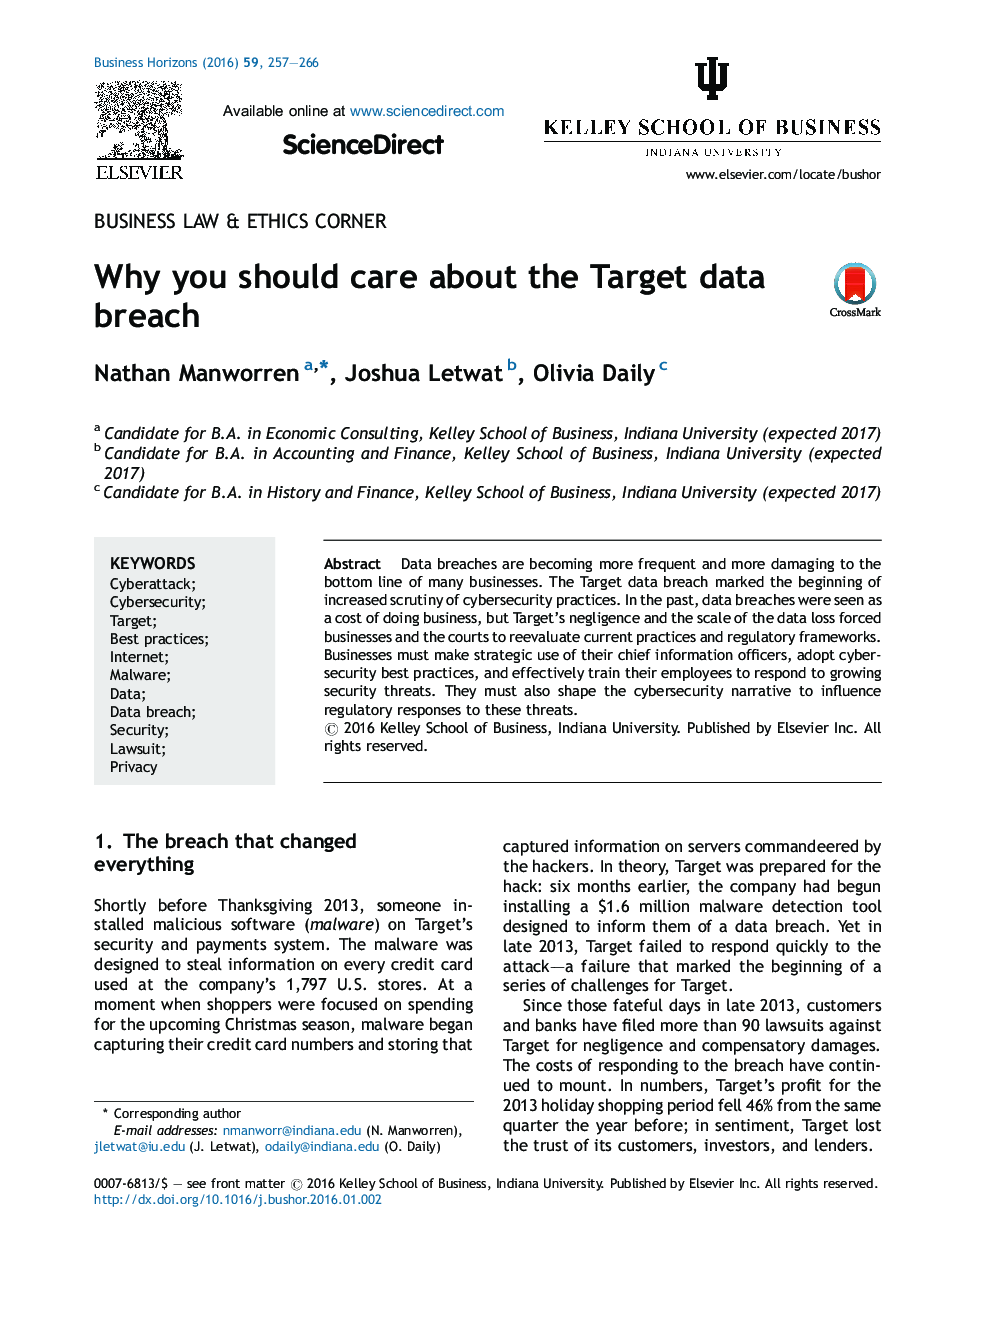 Why you should care about the Target data breach